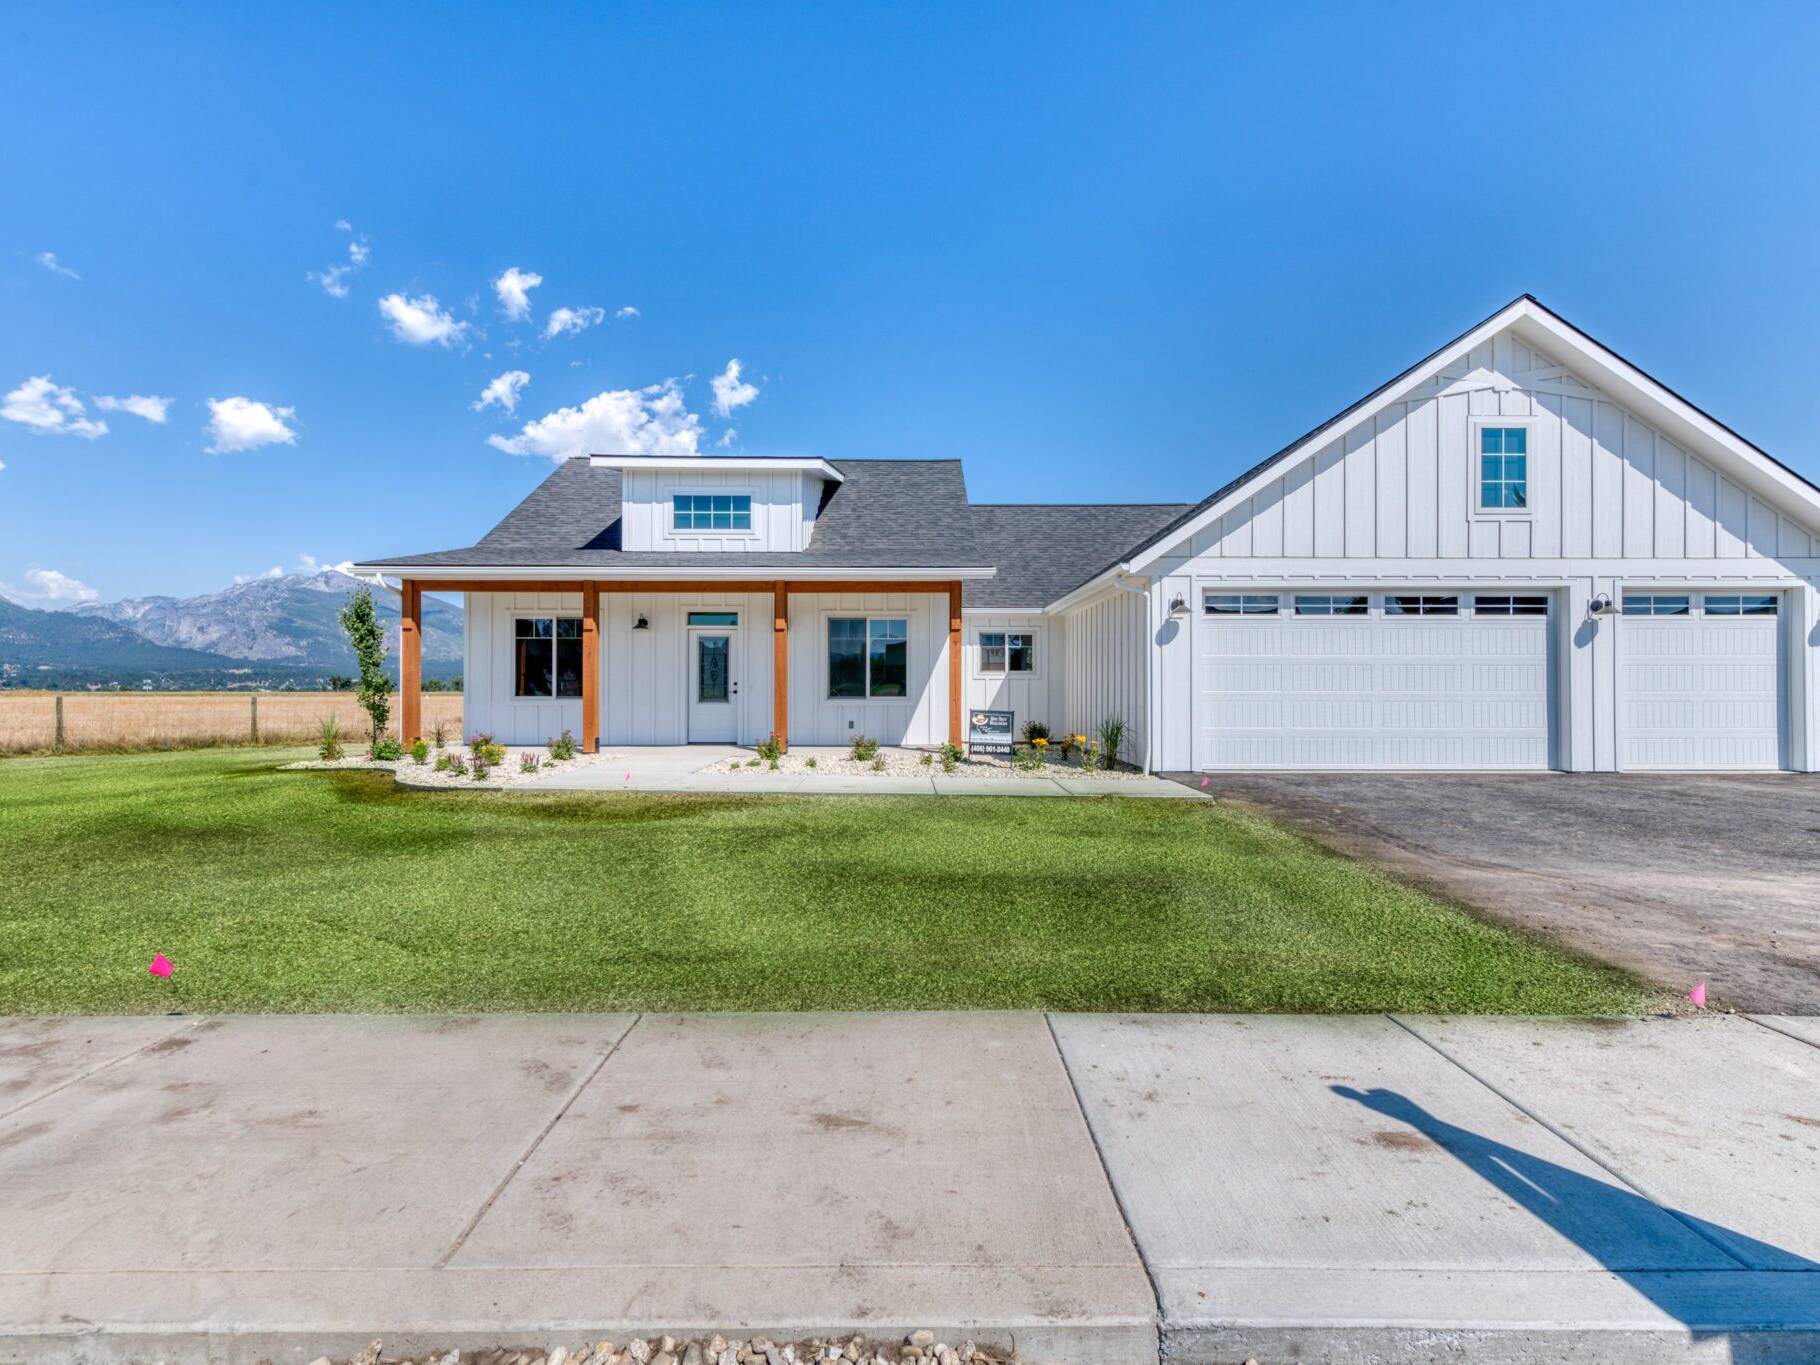 Front Exterior of The Seeley model home - Built by Big Sky Builder in Hamilton, MT